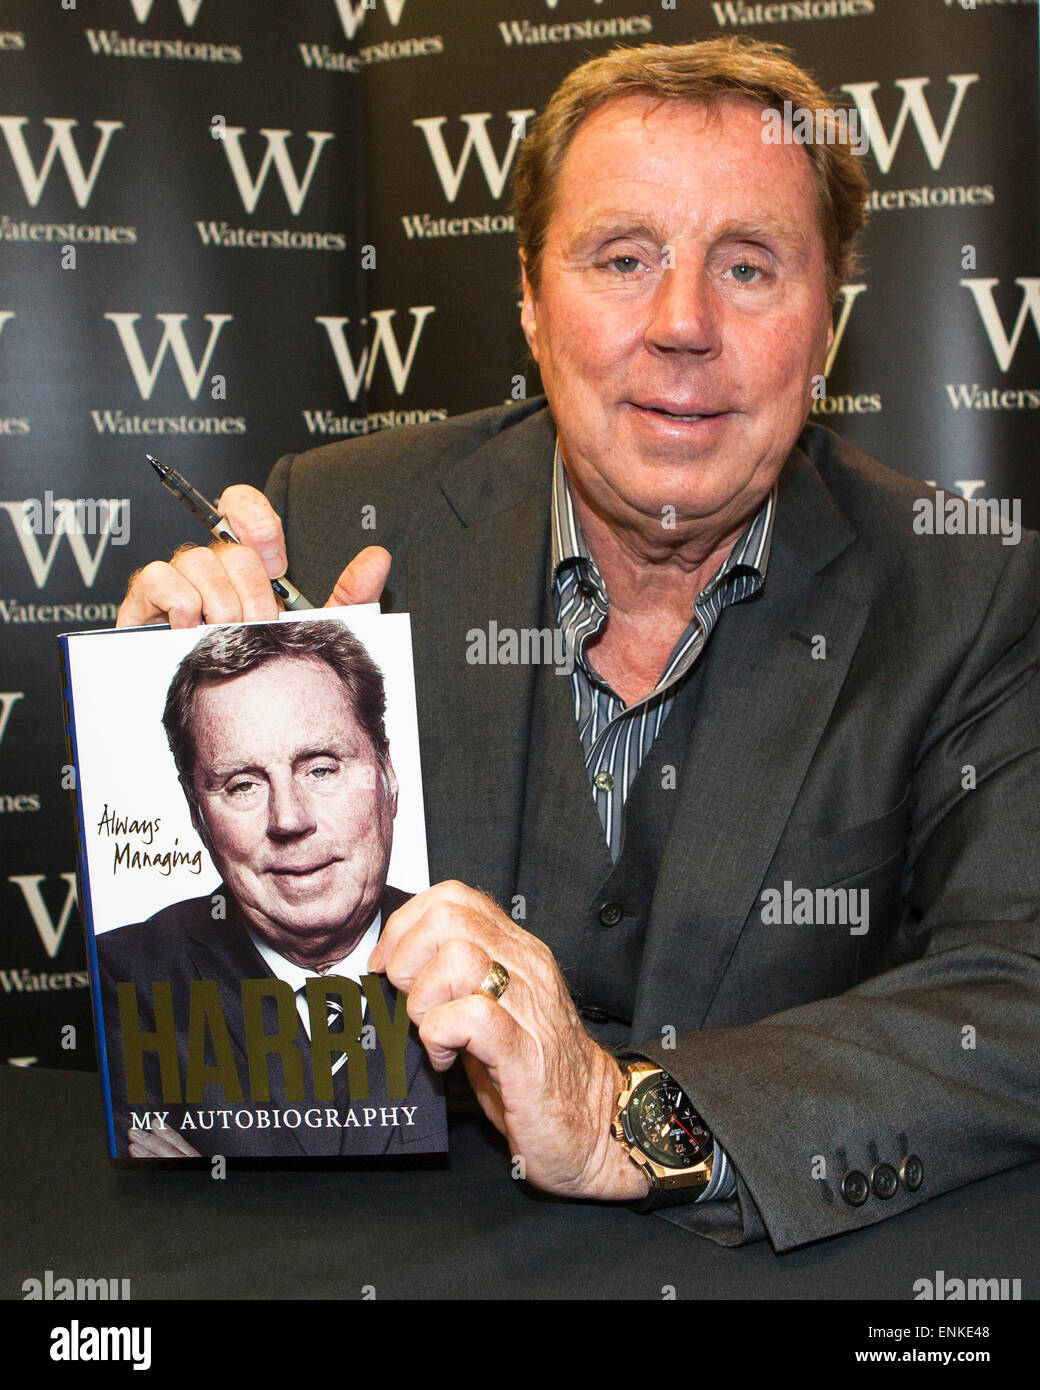 Football manager Harry Redknapp signs copies of his autobiography 'Always Managing' at Waterstones, Leadenhall Market in London. Stock Photo